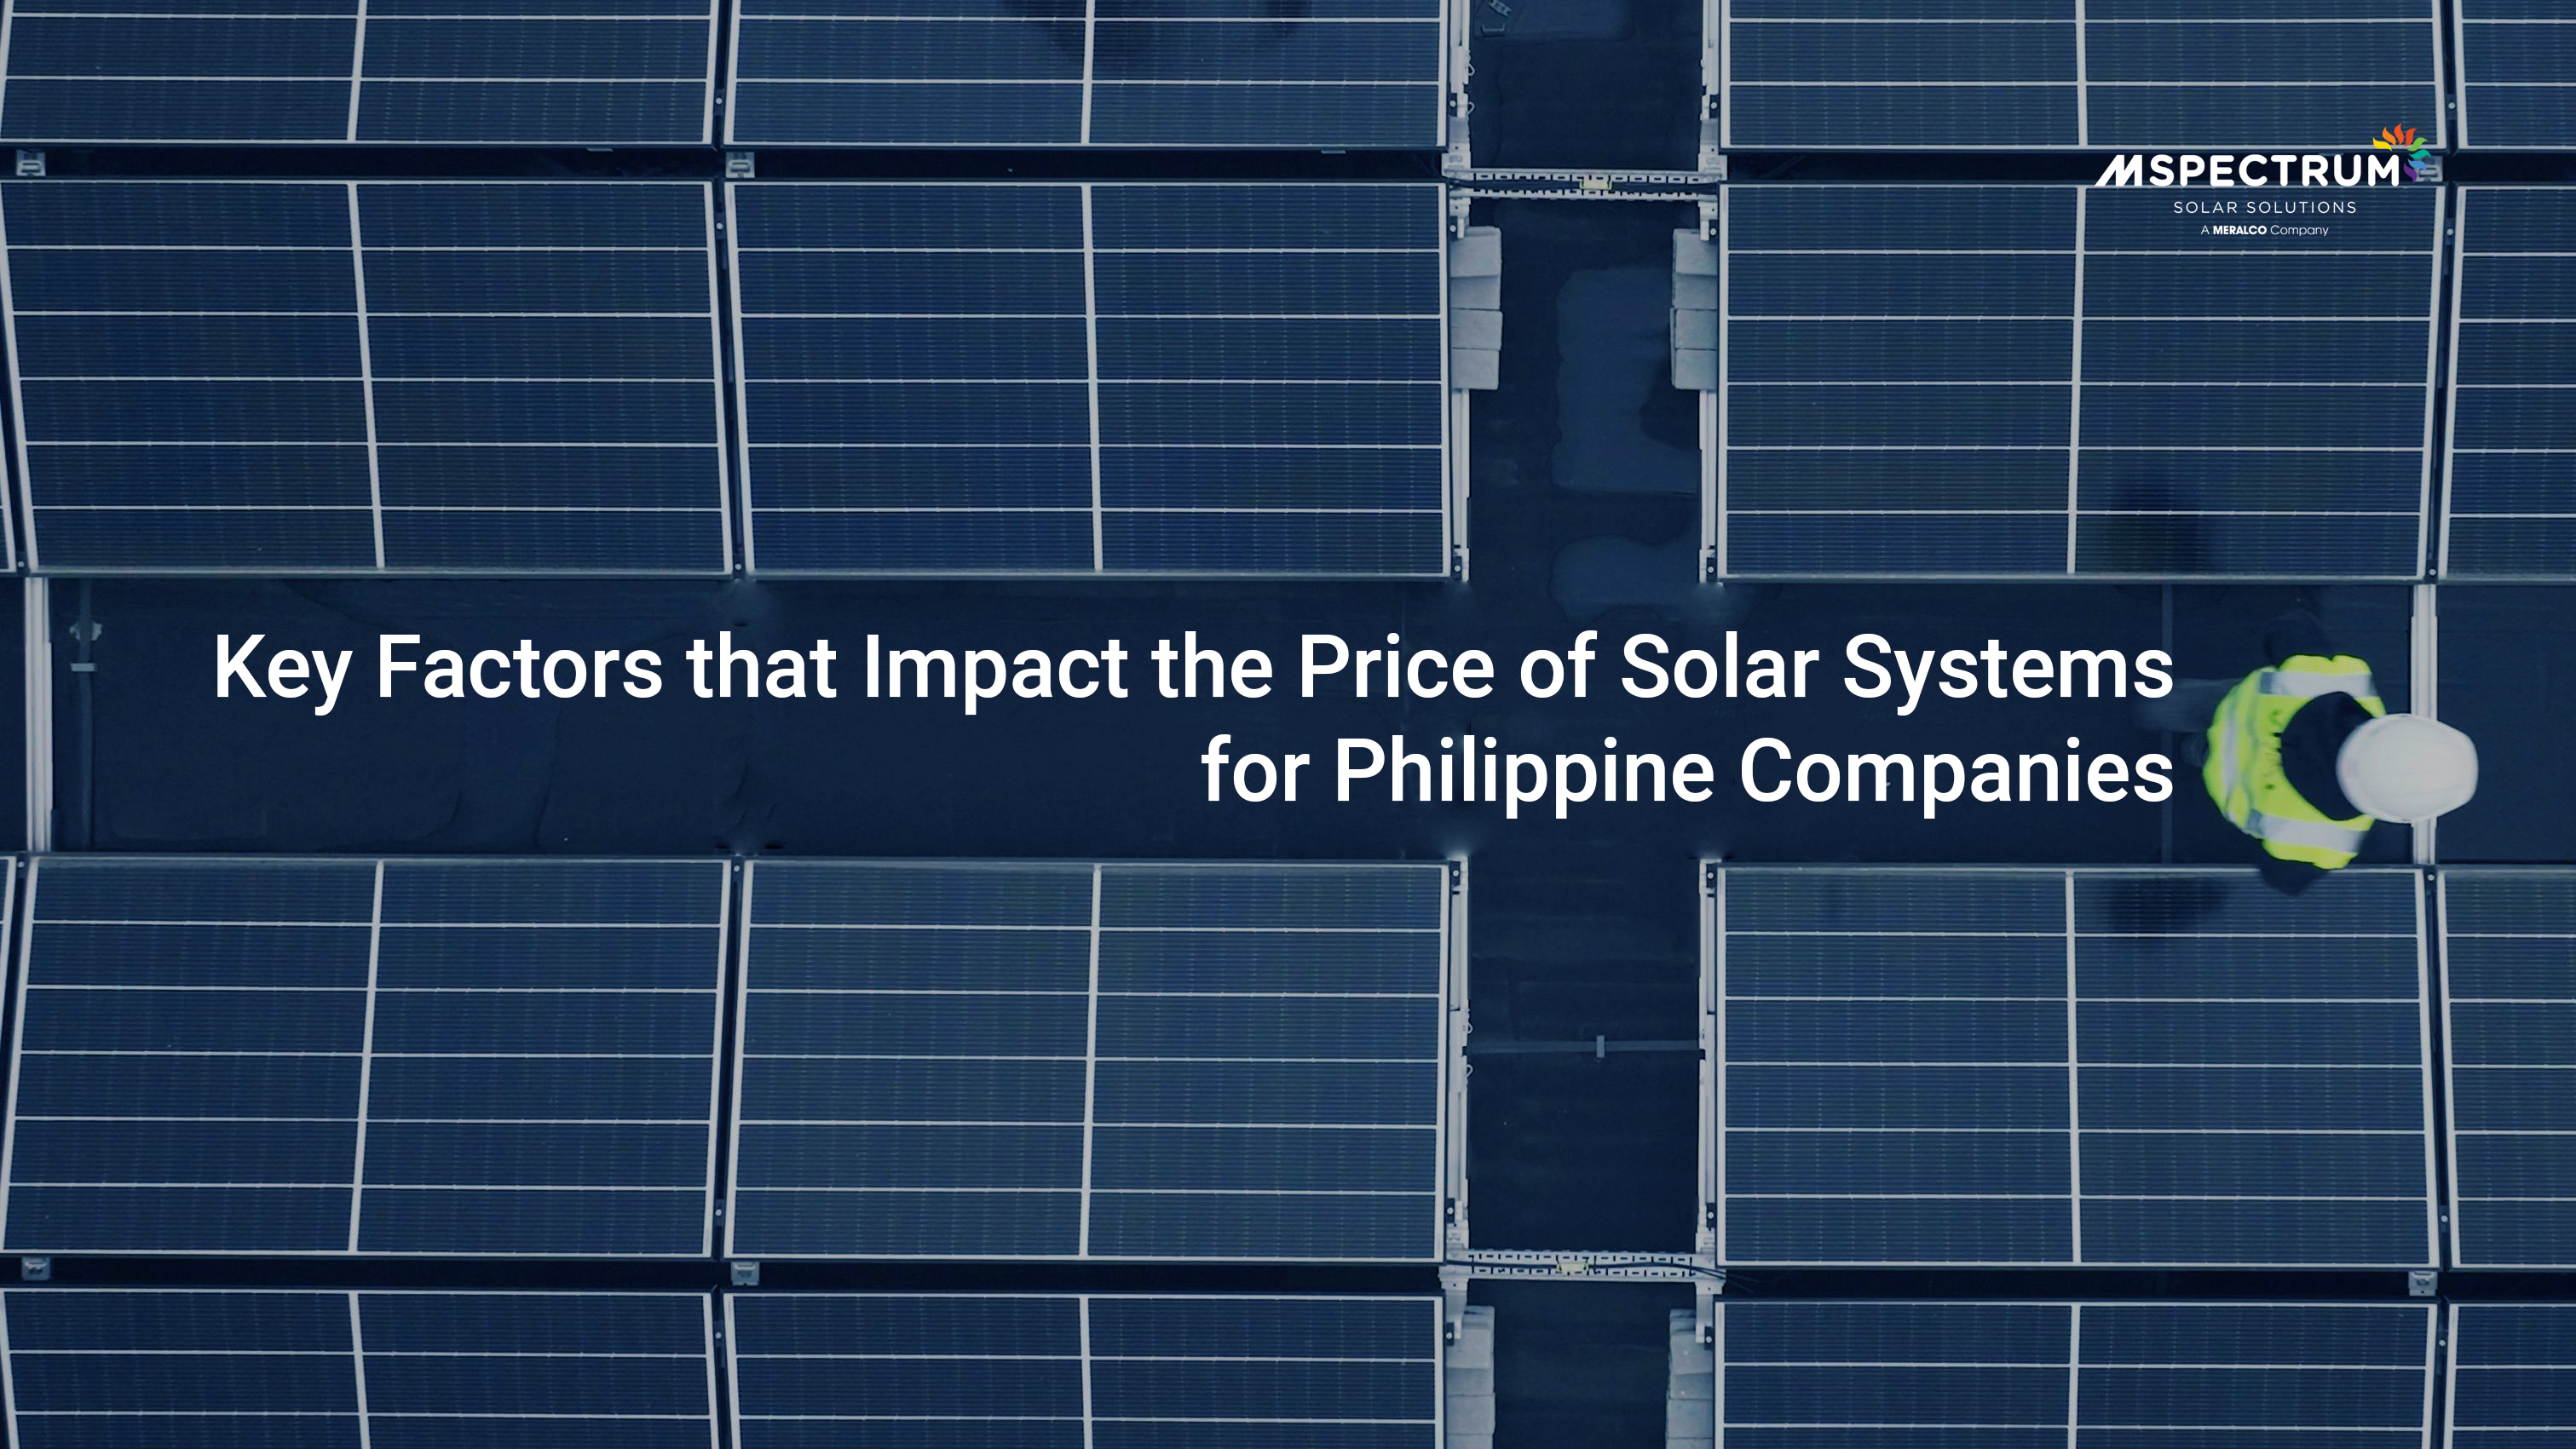 Key Factors that impact price of solar for philippine companies